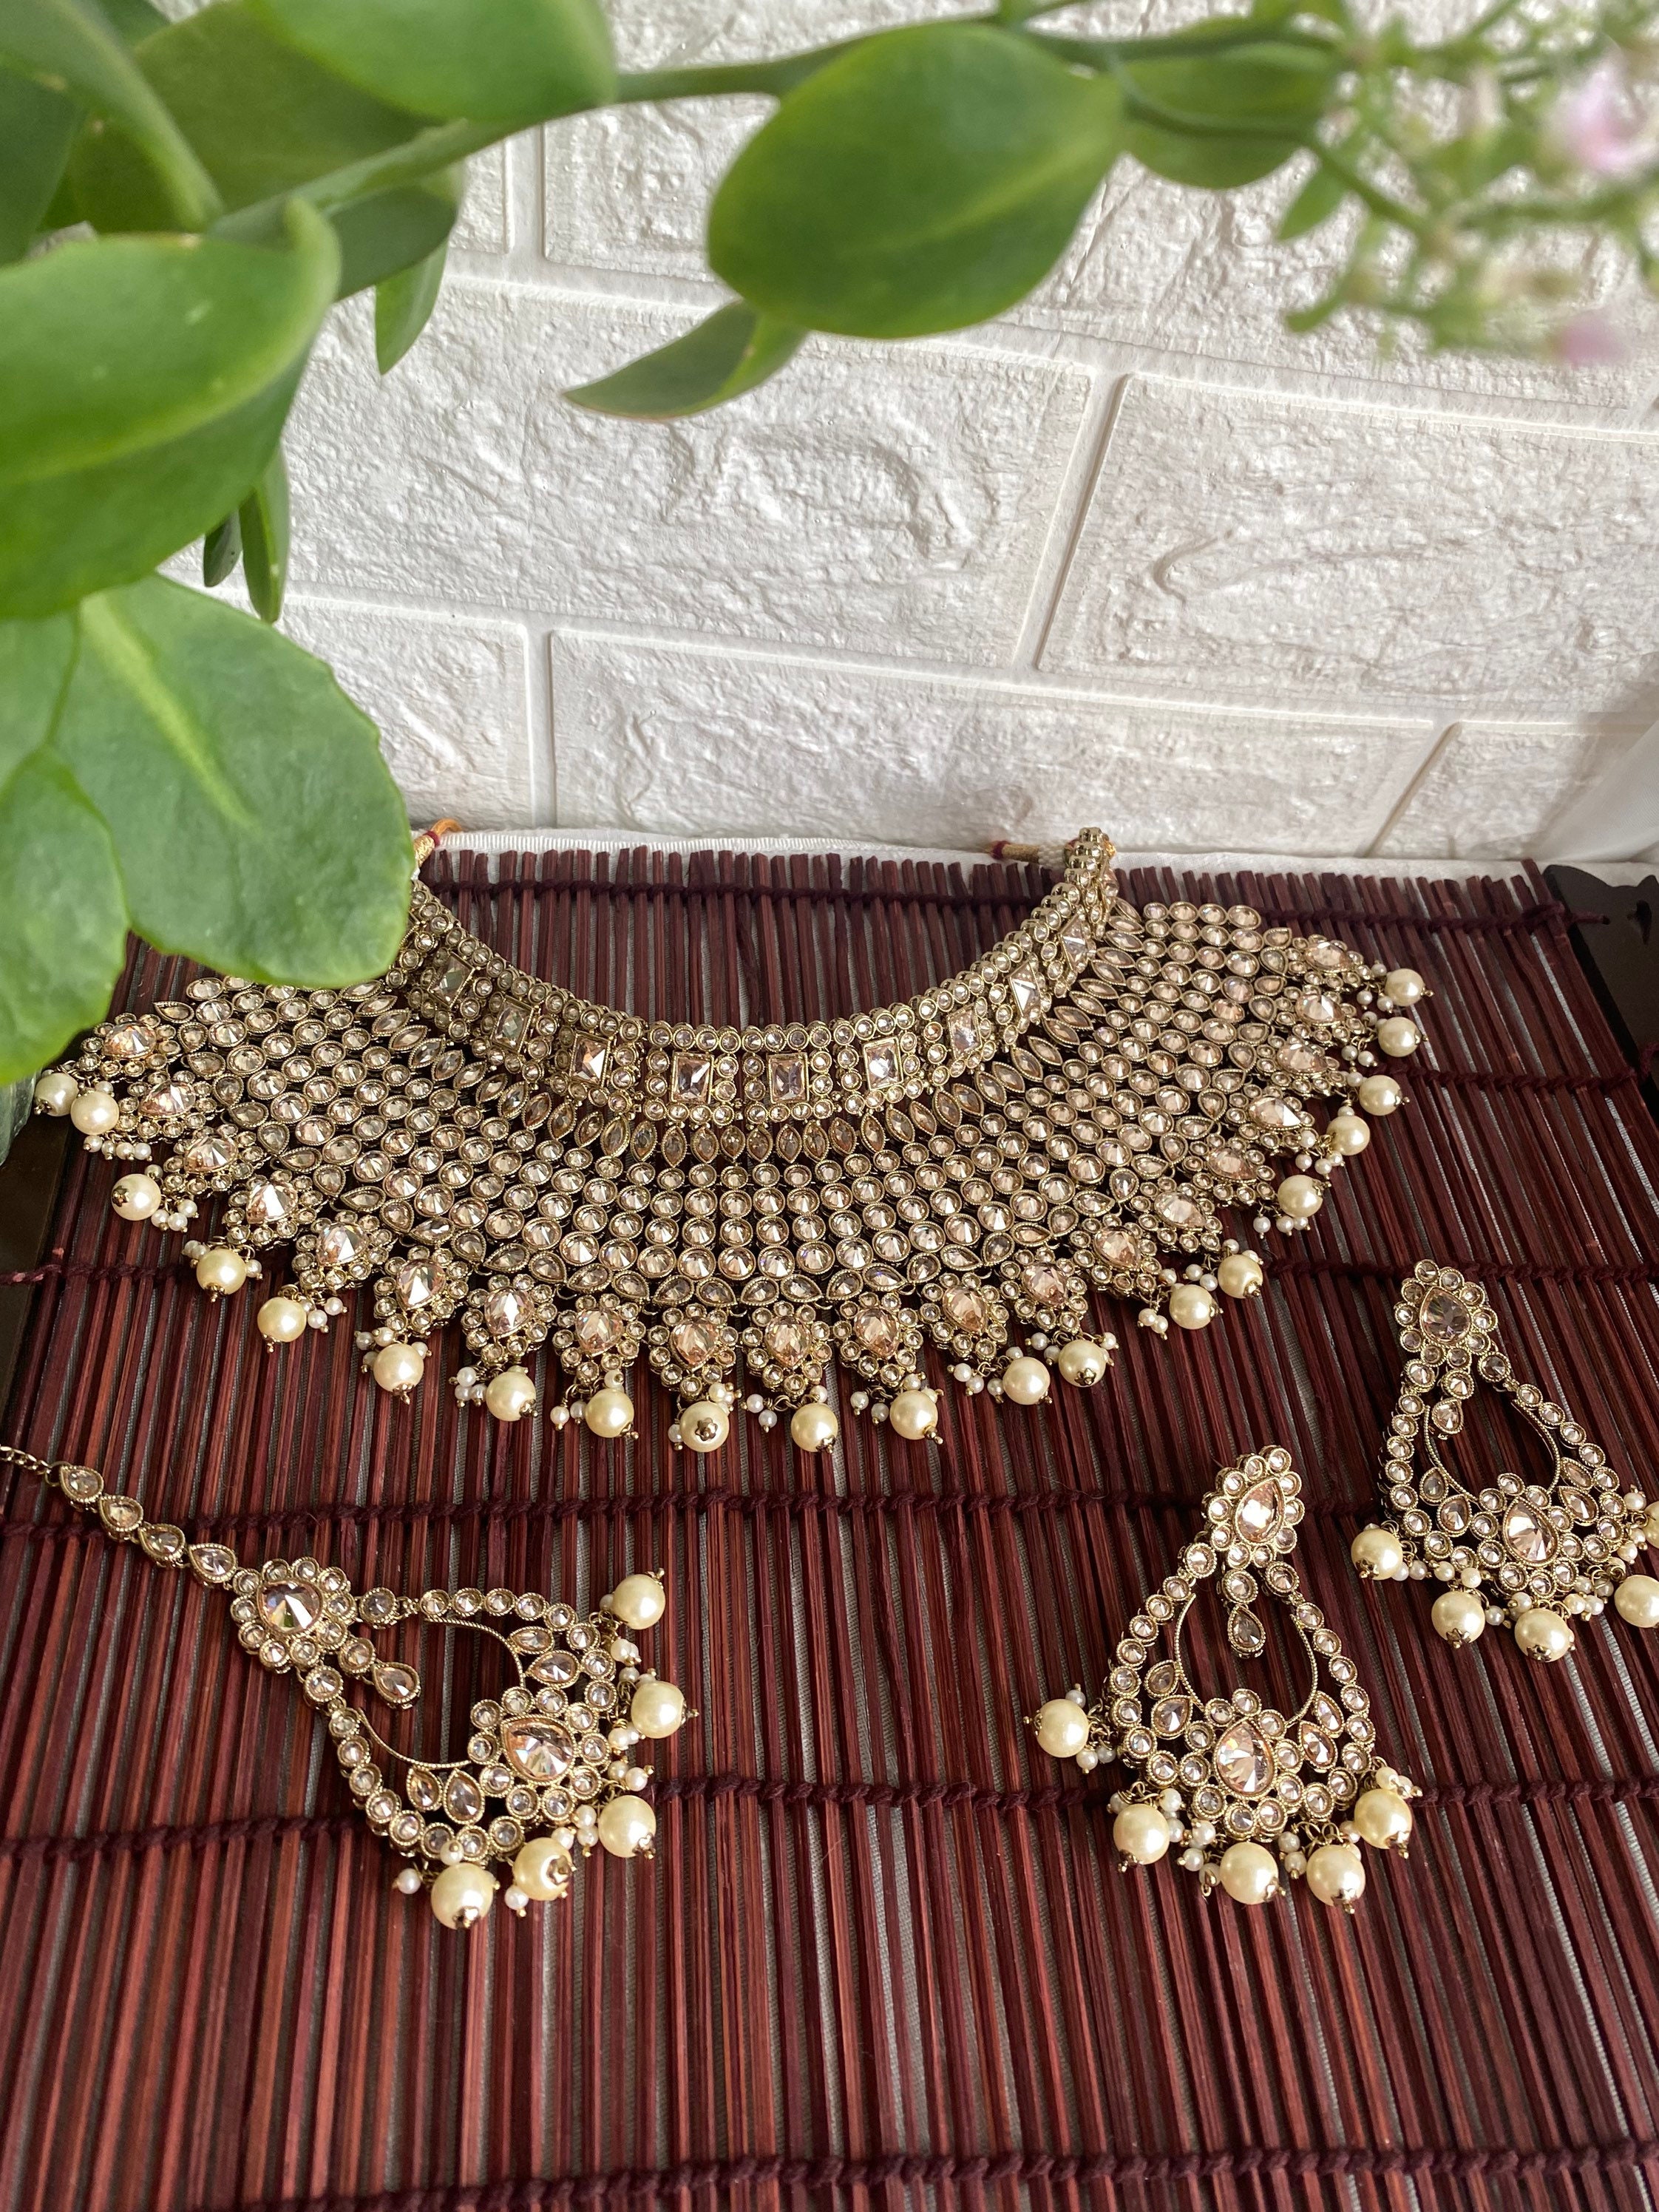 How to Choose Indian Wedding Jewelry